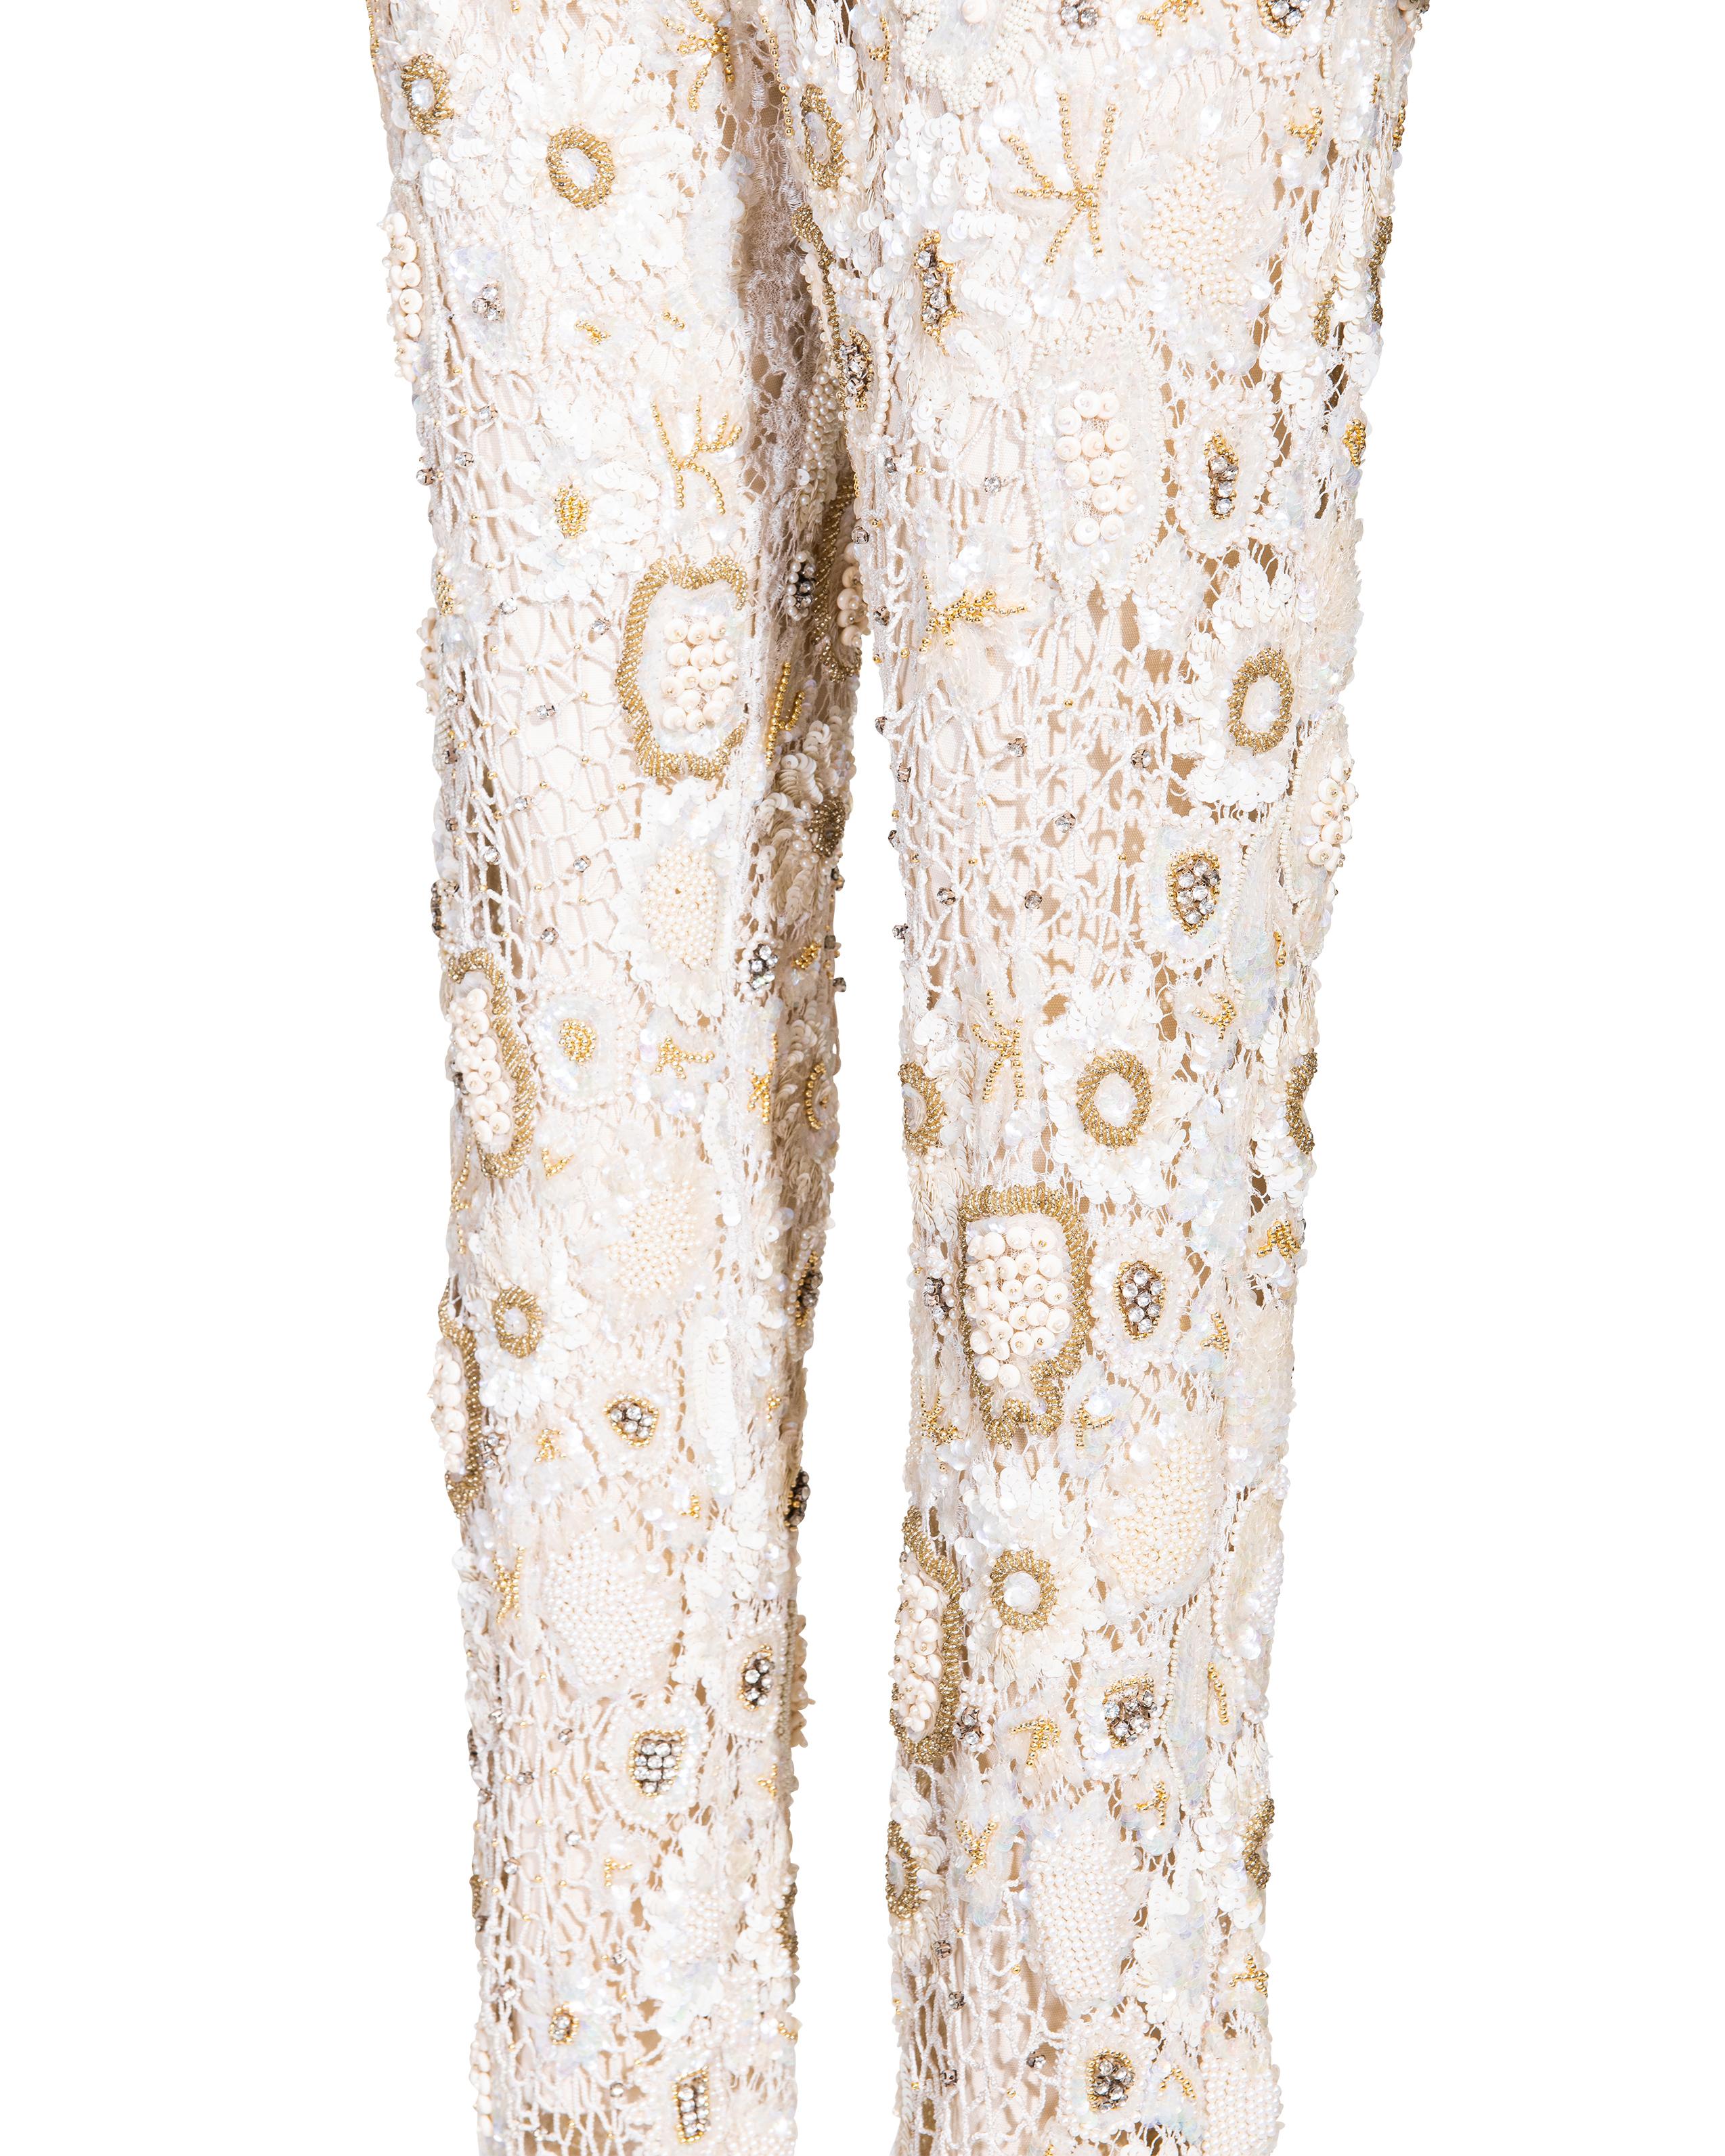 A/W 1994 Louis Feraud Haute Couture Embellished Embroidered Floral Jumpsuit For Sale 9